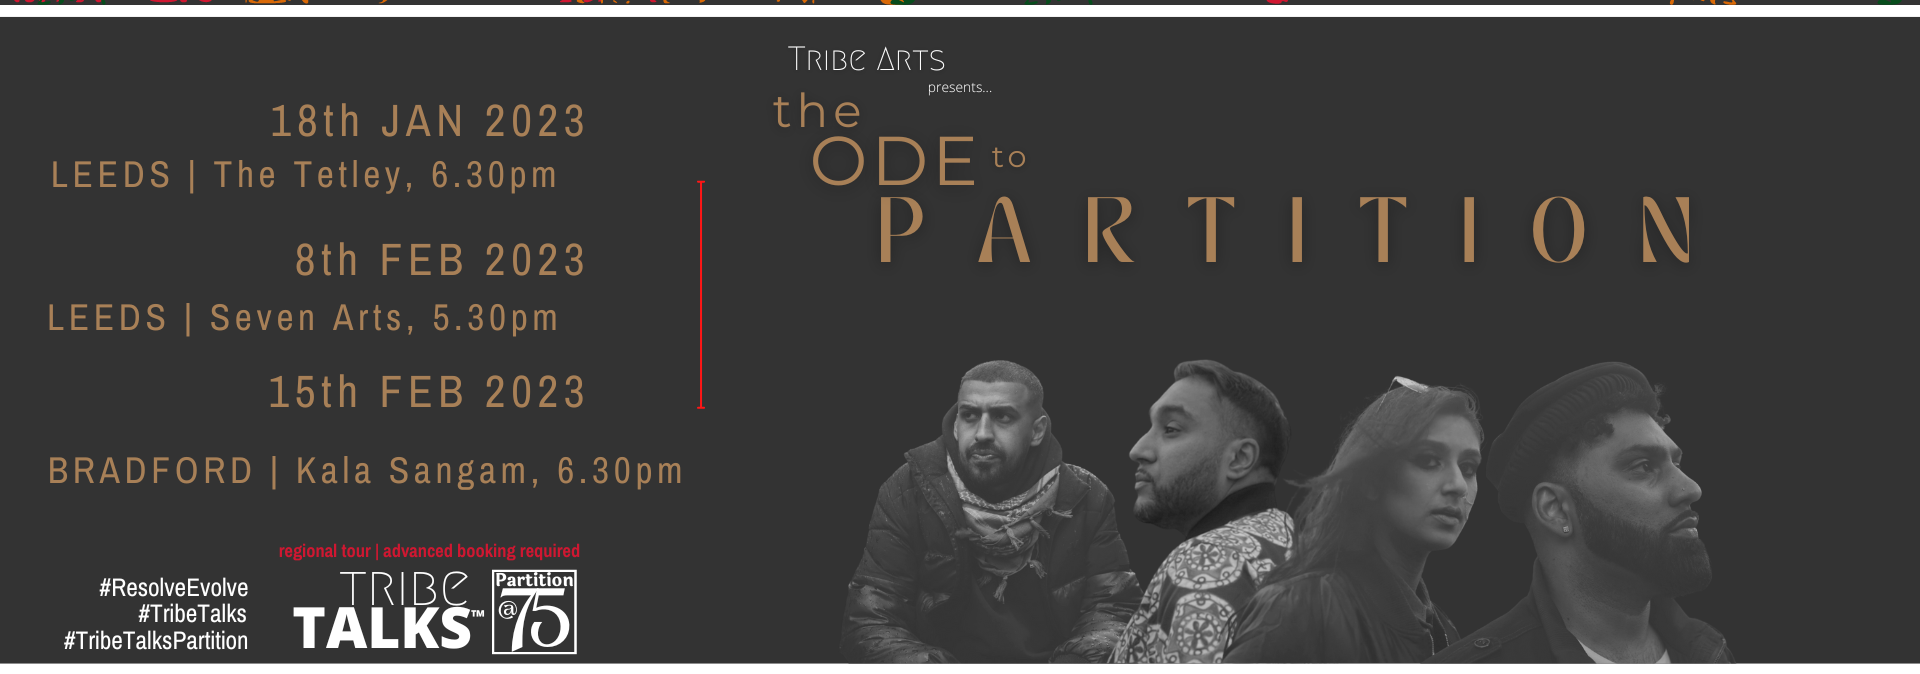 Tribe Arts: Ode to Partition Film Screening